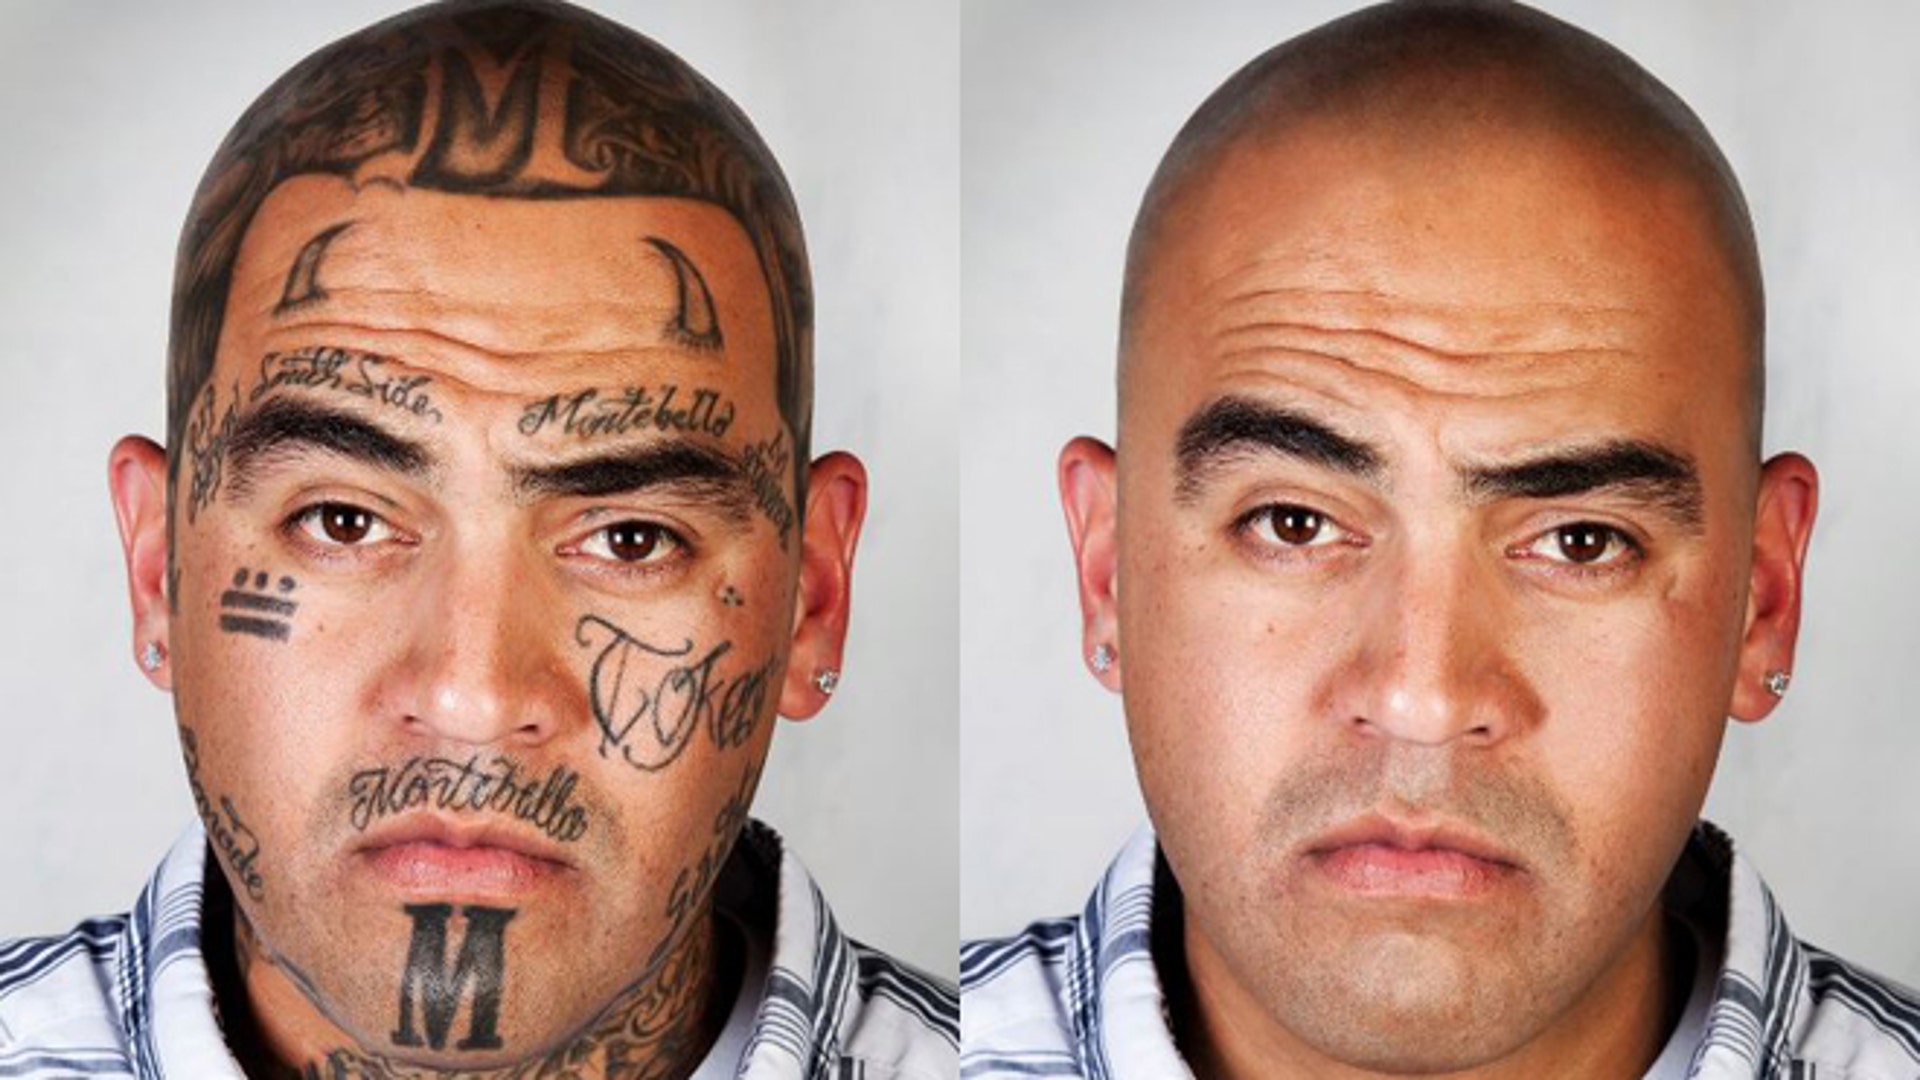 gang members with tattoos